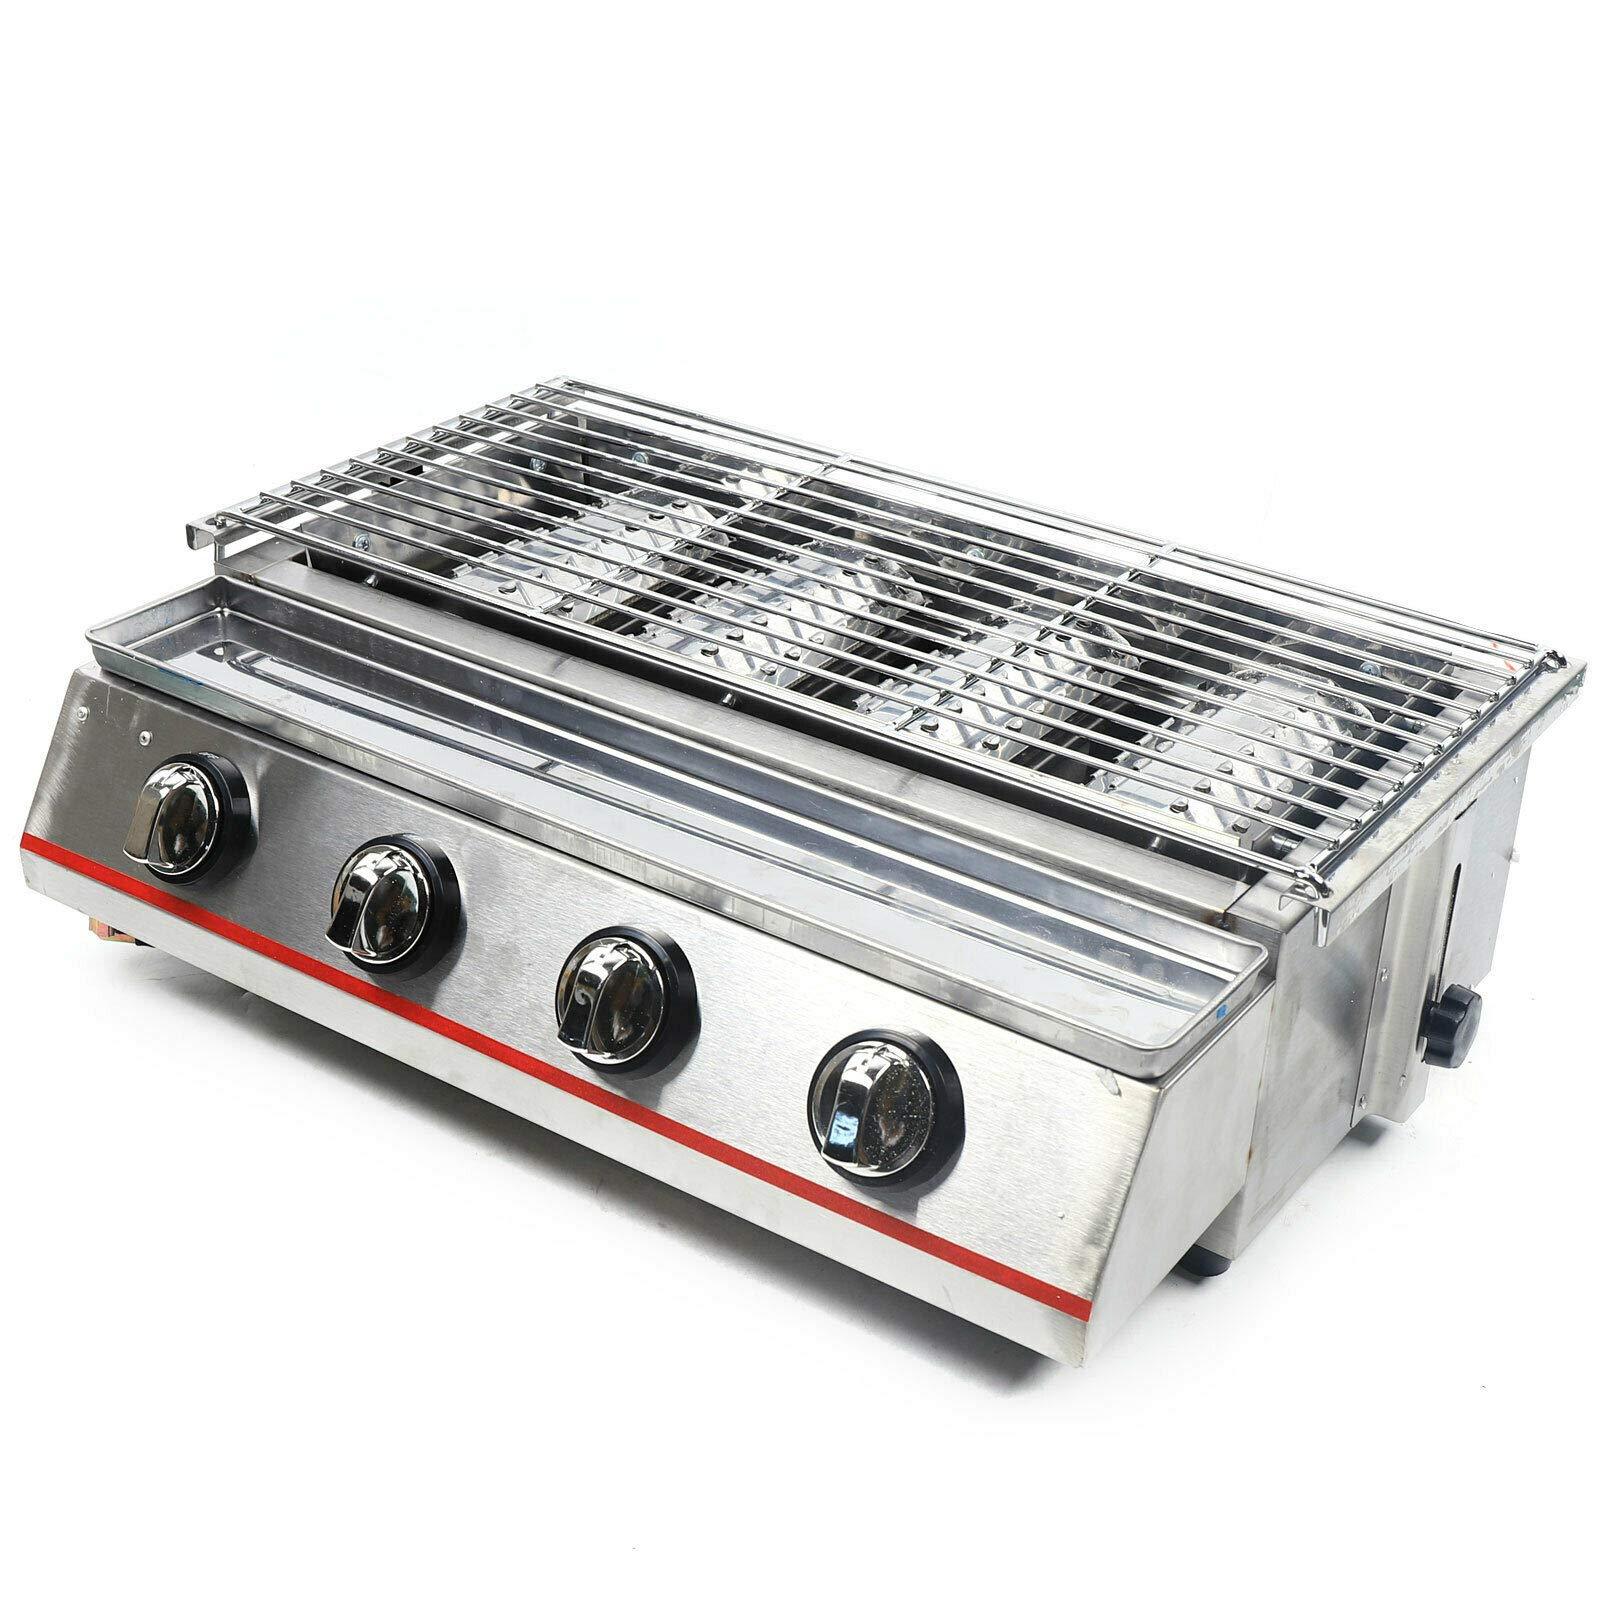 Tabletop Grill 